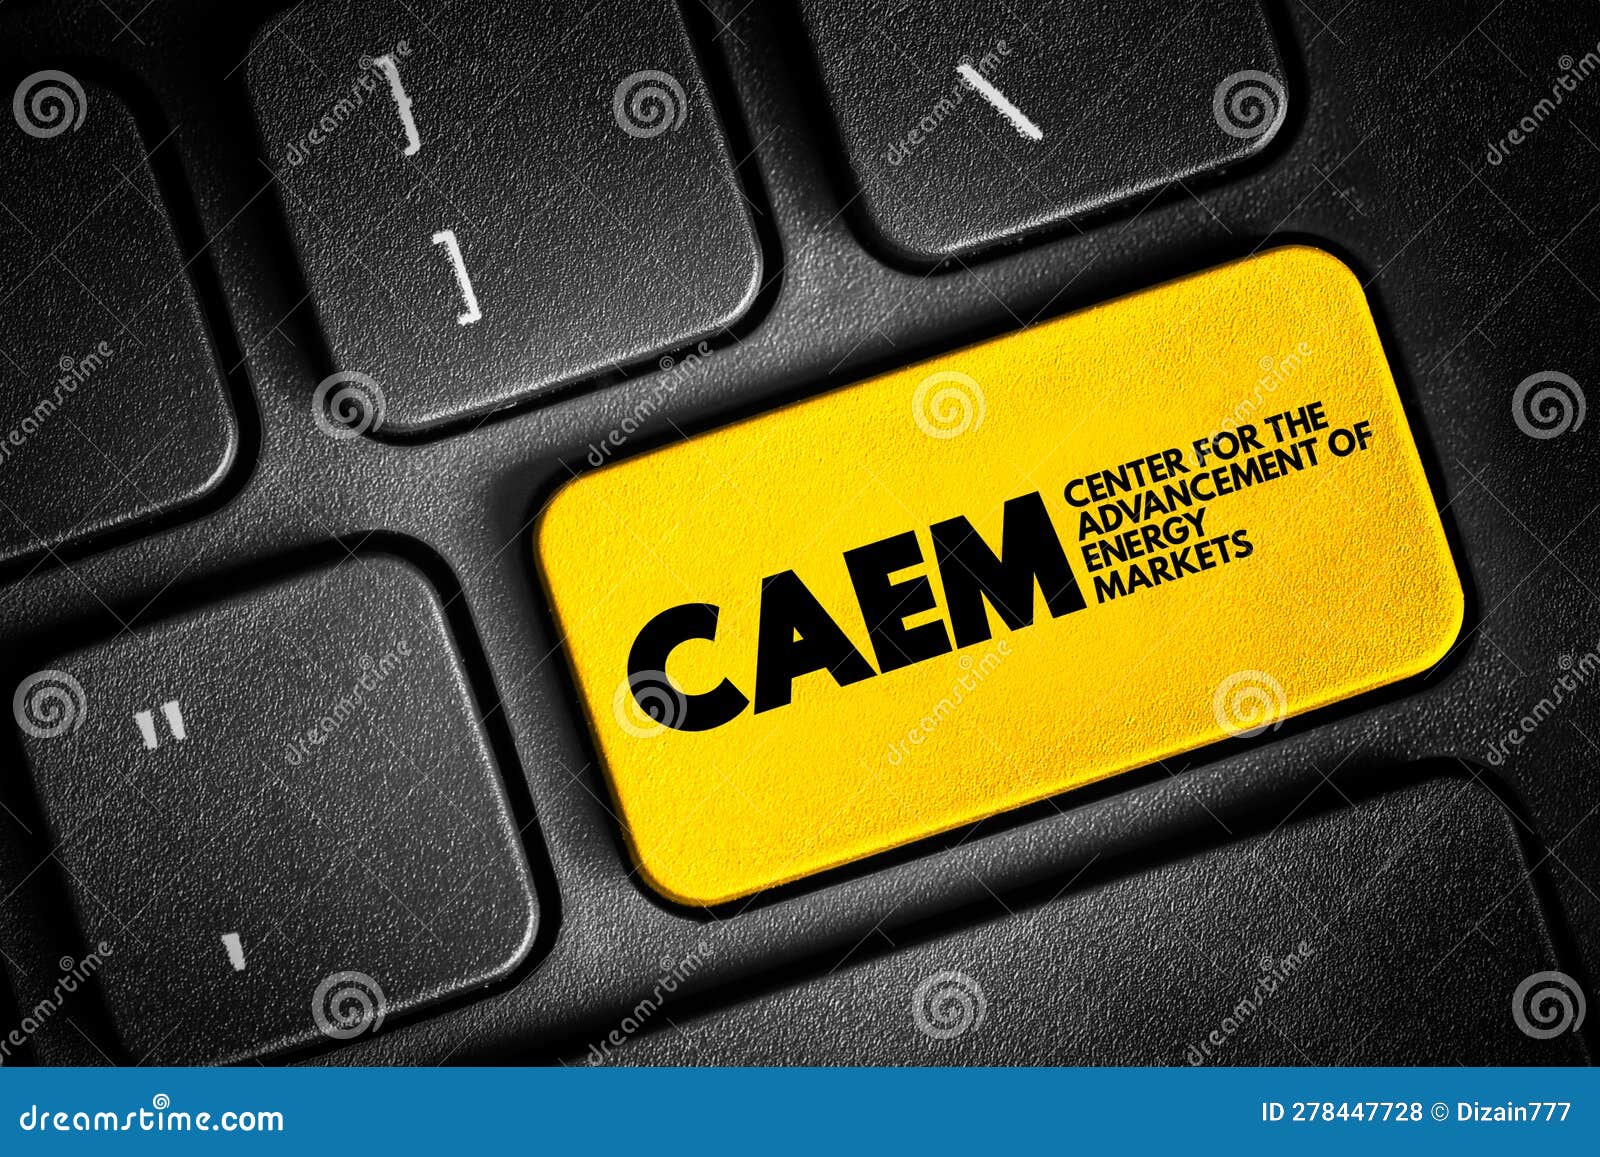 caem - center for the advancement of energy markets acronym, abbreviation text concept button on keyboard